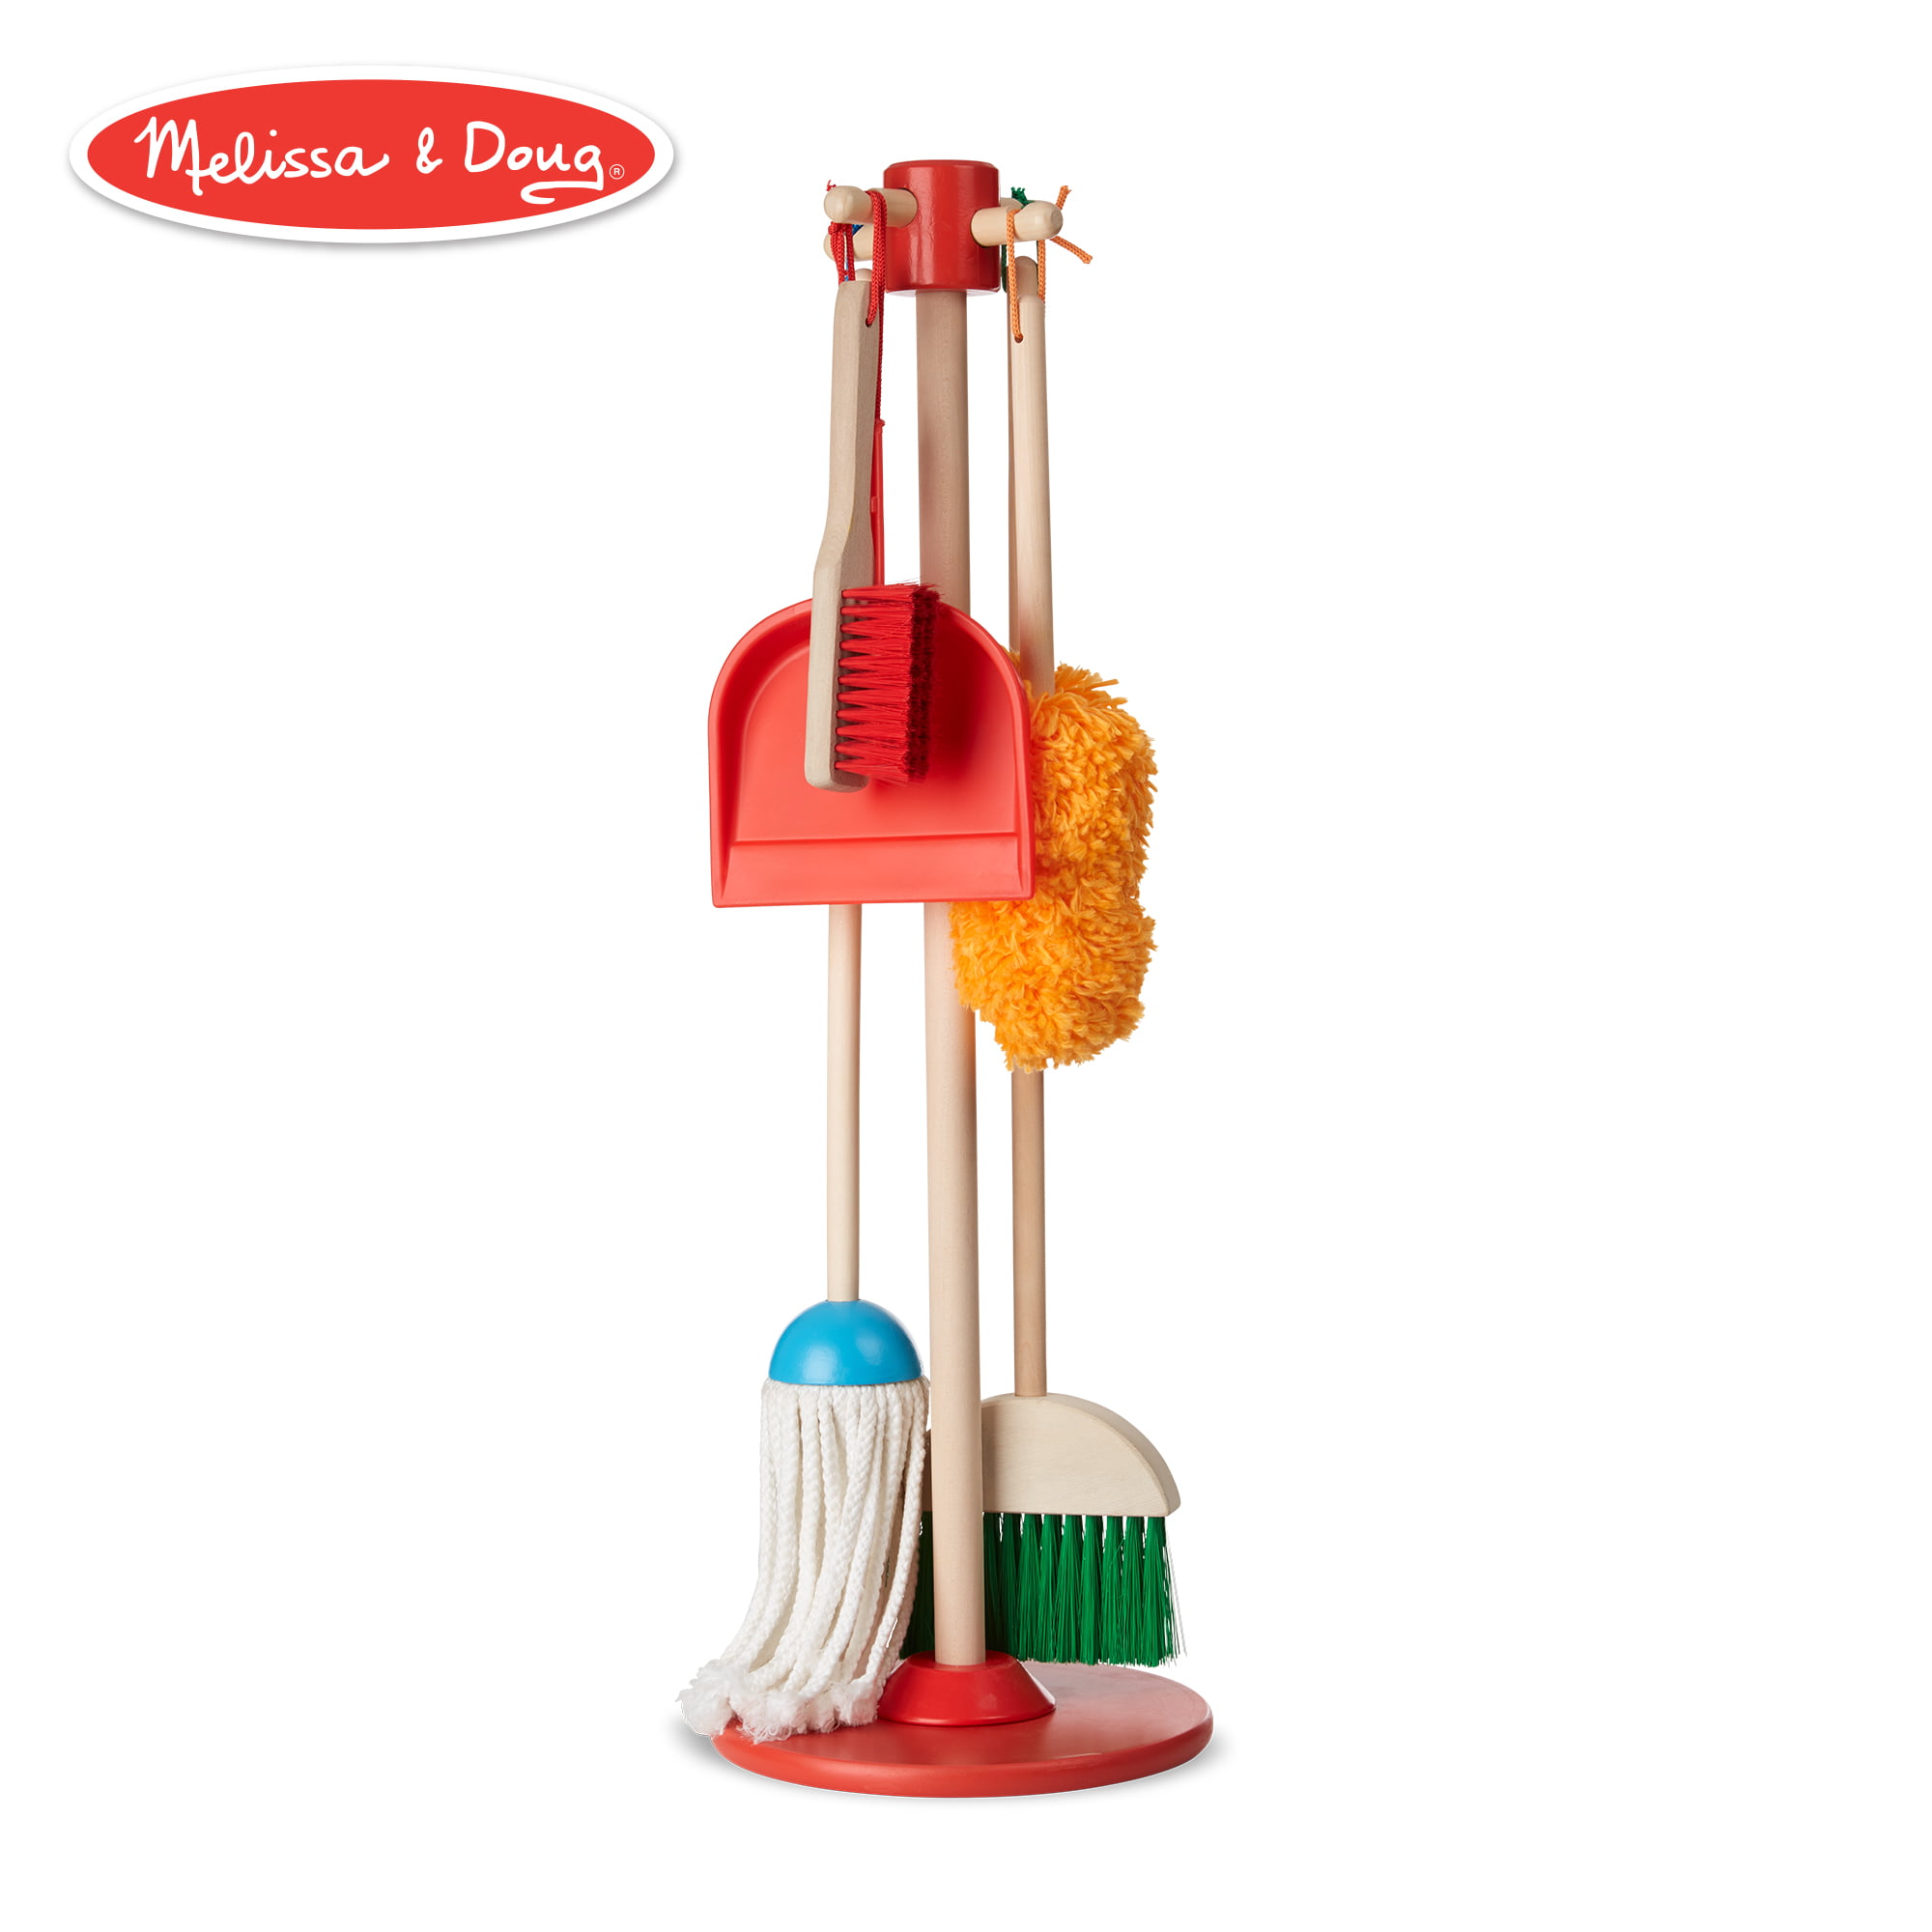 toy dustpan and brush set wooden